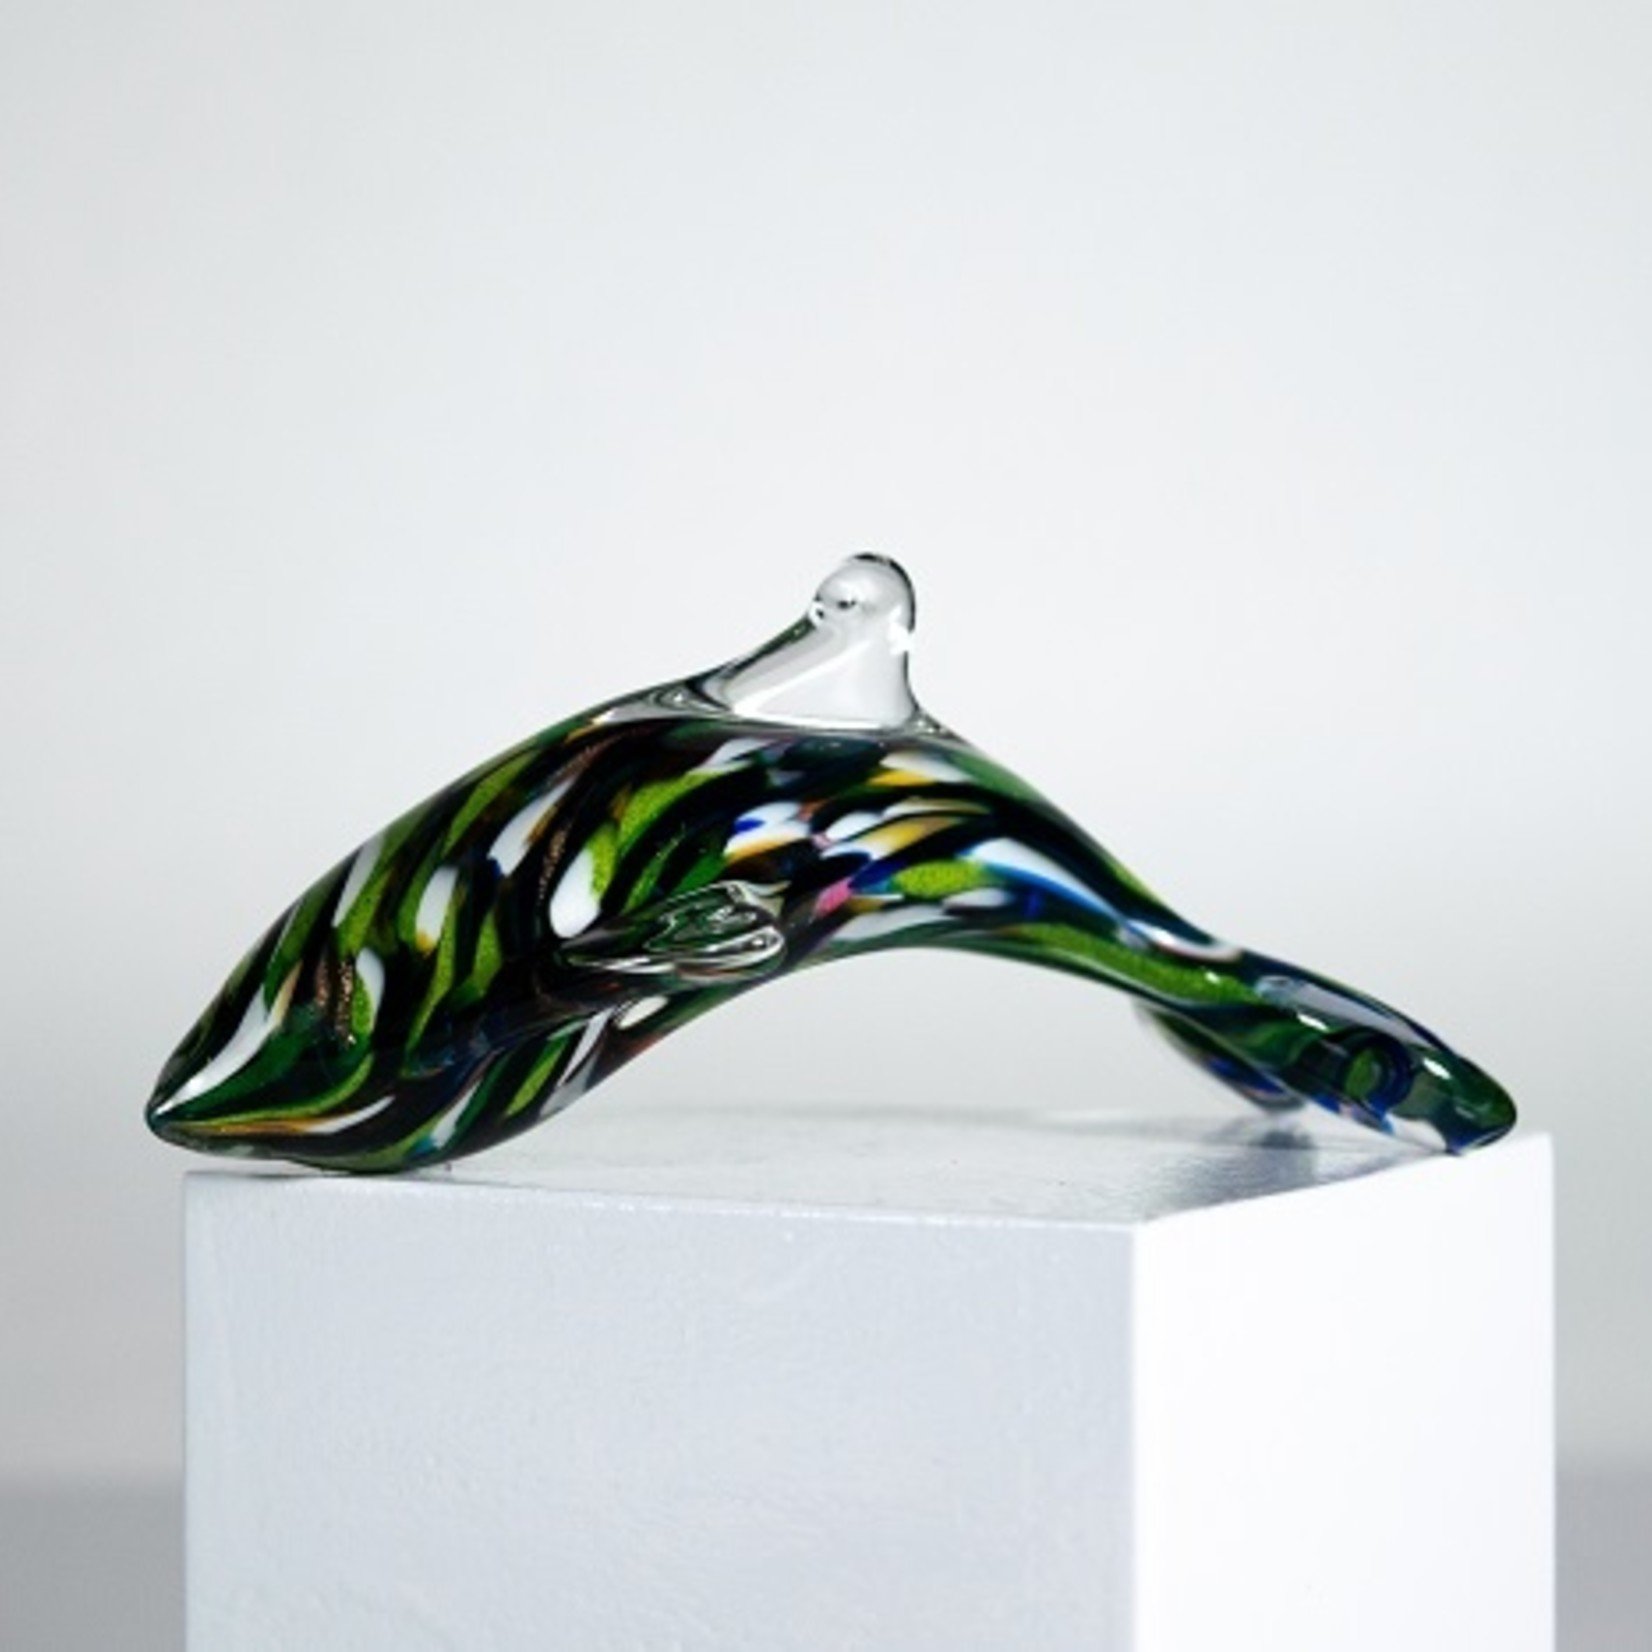 Ron Hinkle Glassworks Ron Hinkle Glass:  Small Dolphin